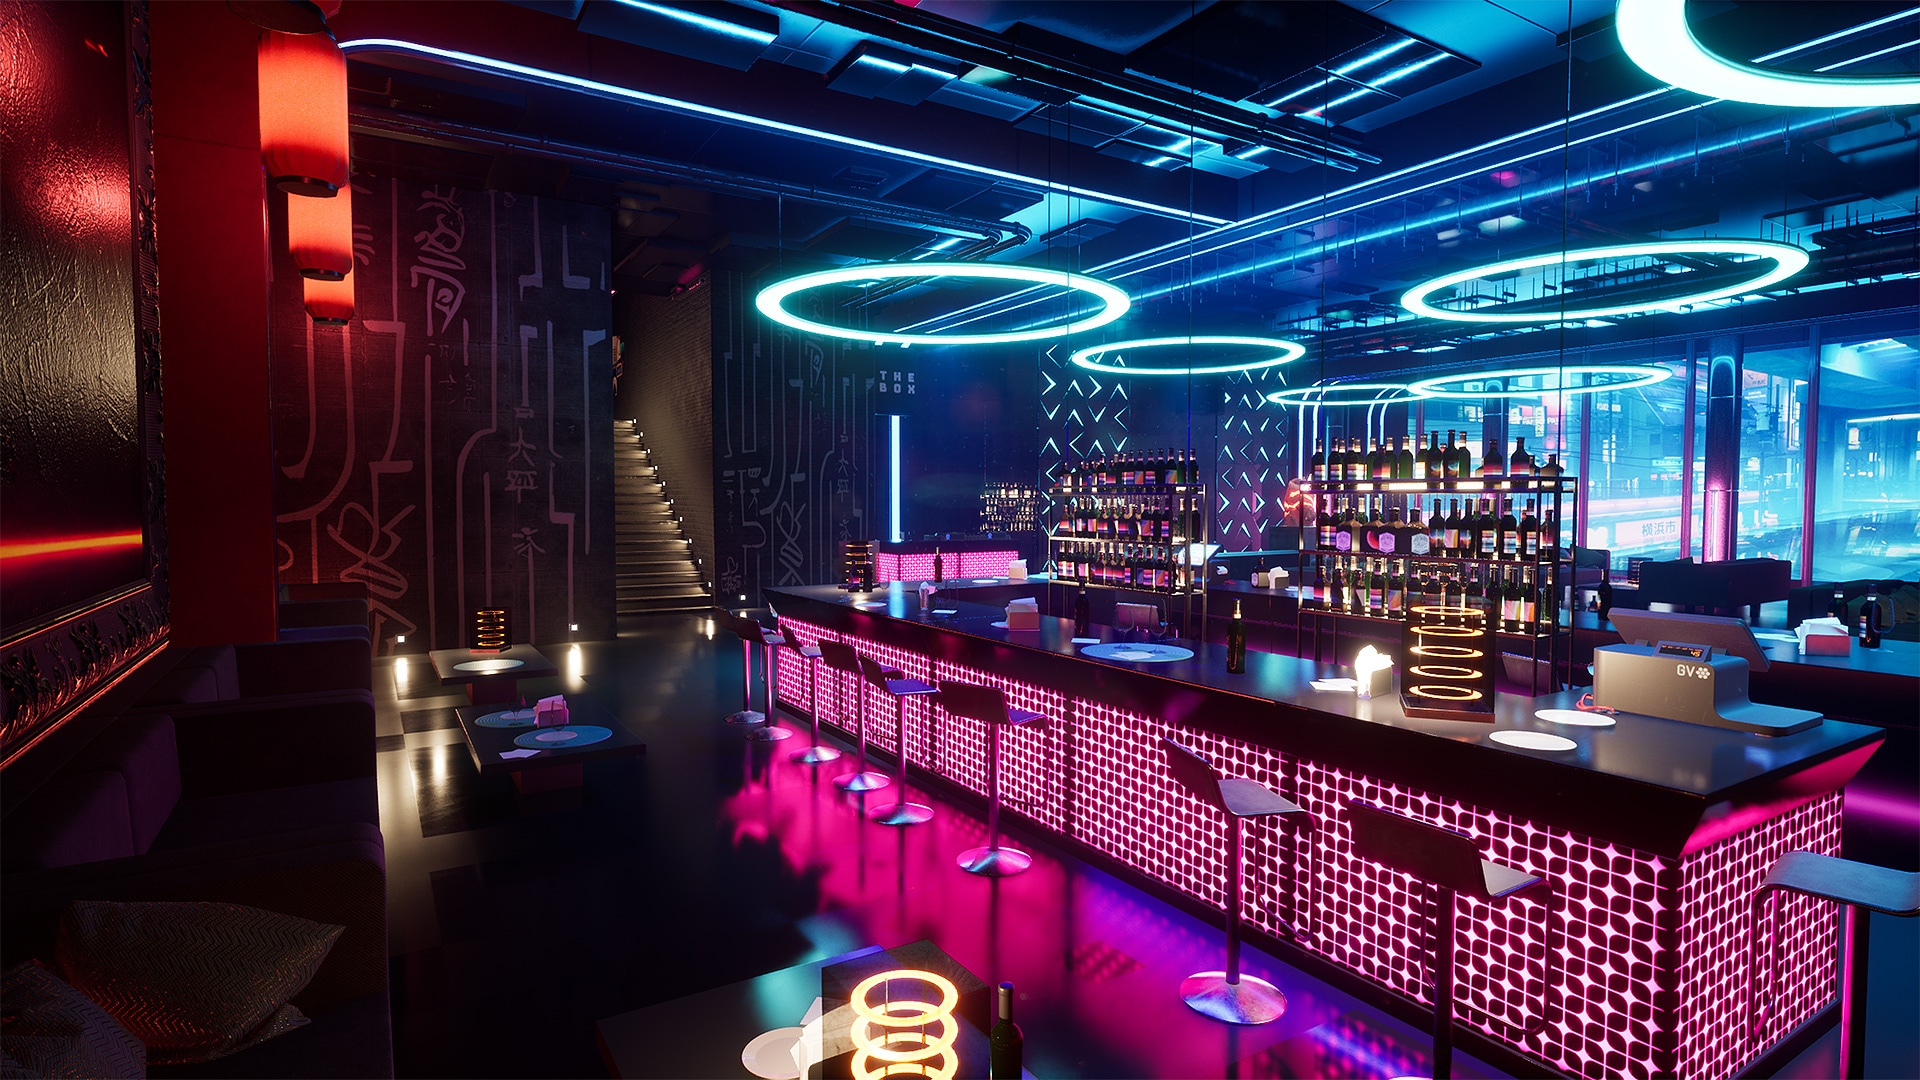 Value Drivers for Bars and Nightclubs - Peak Business Valuation